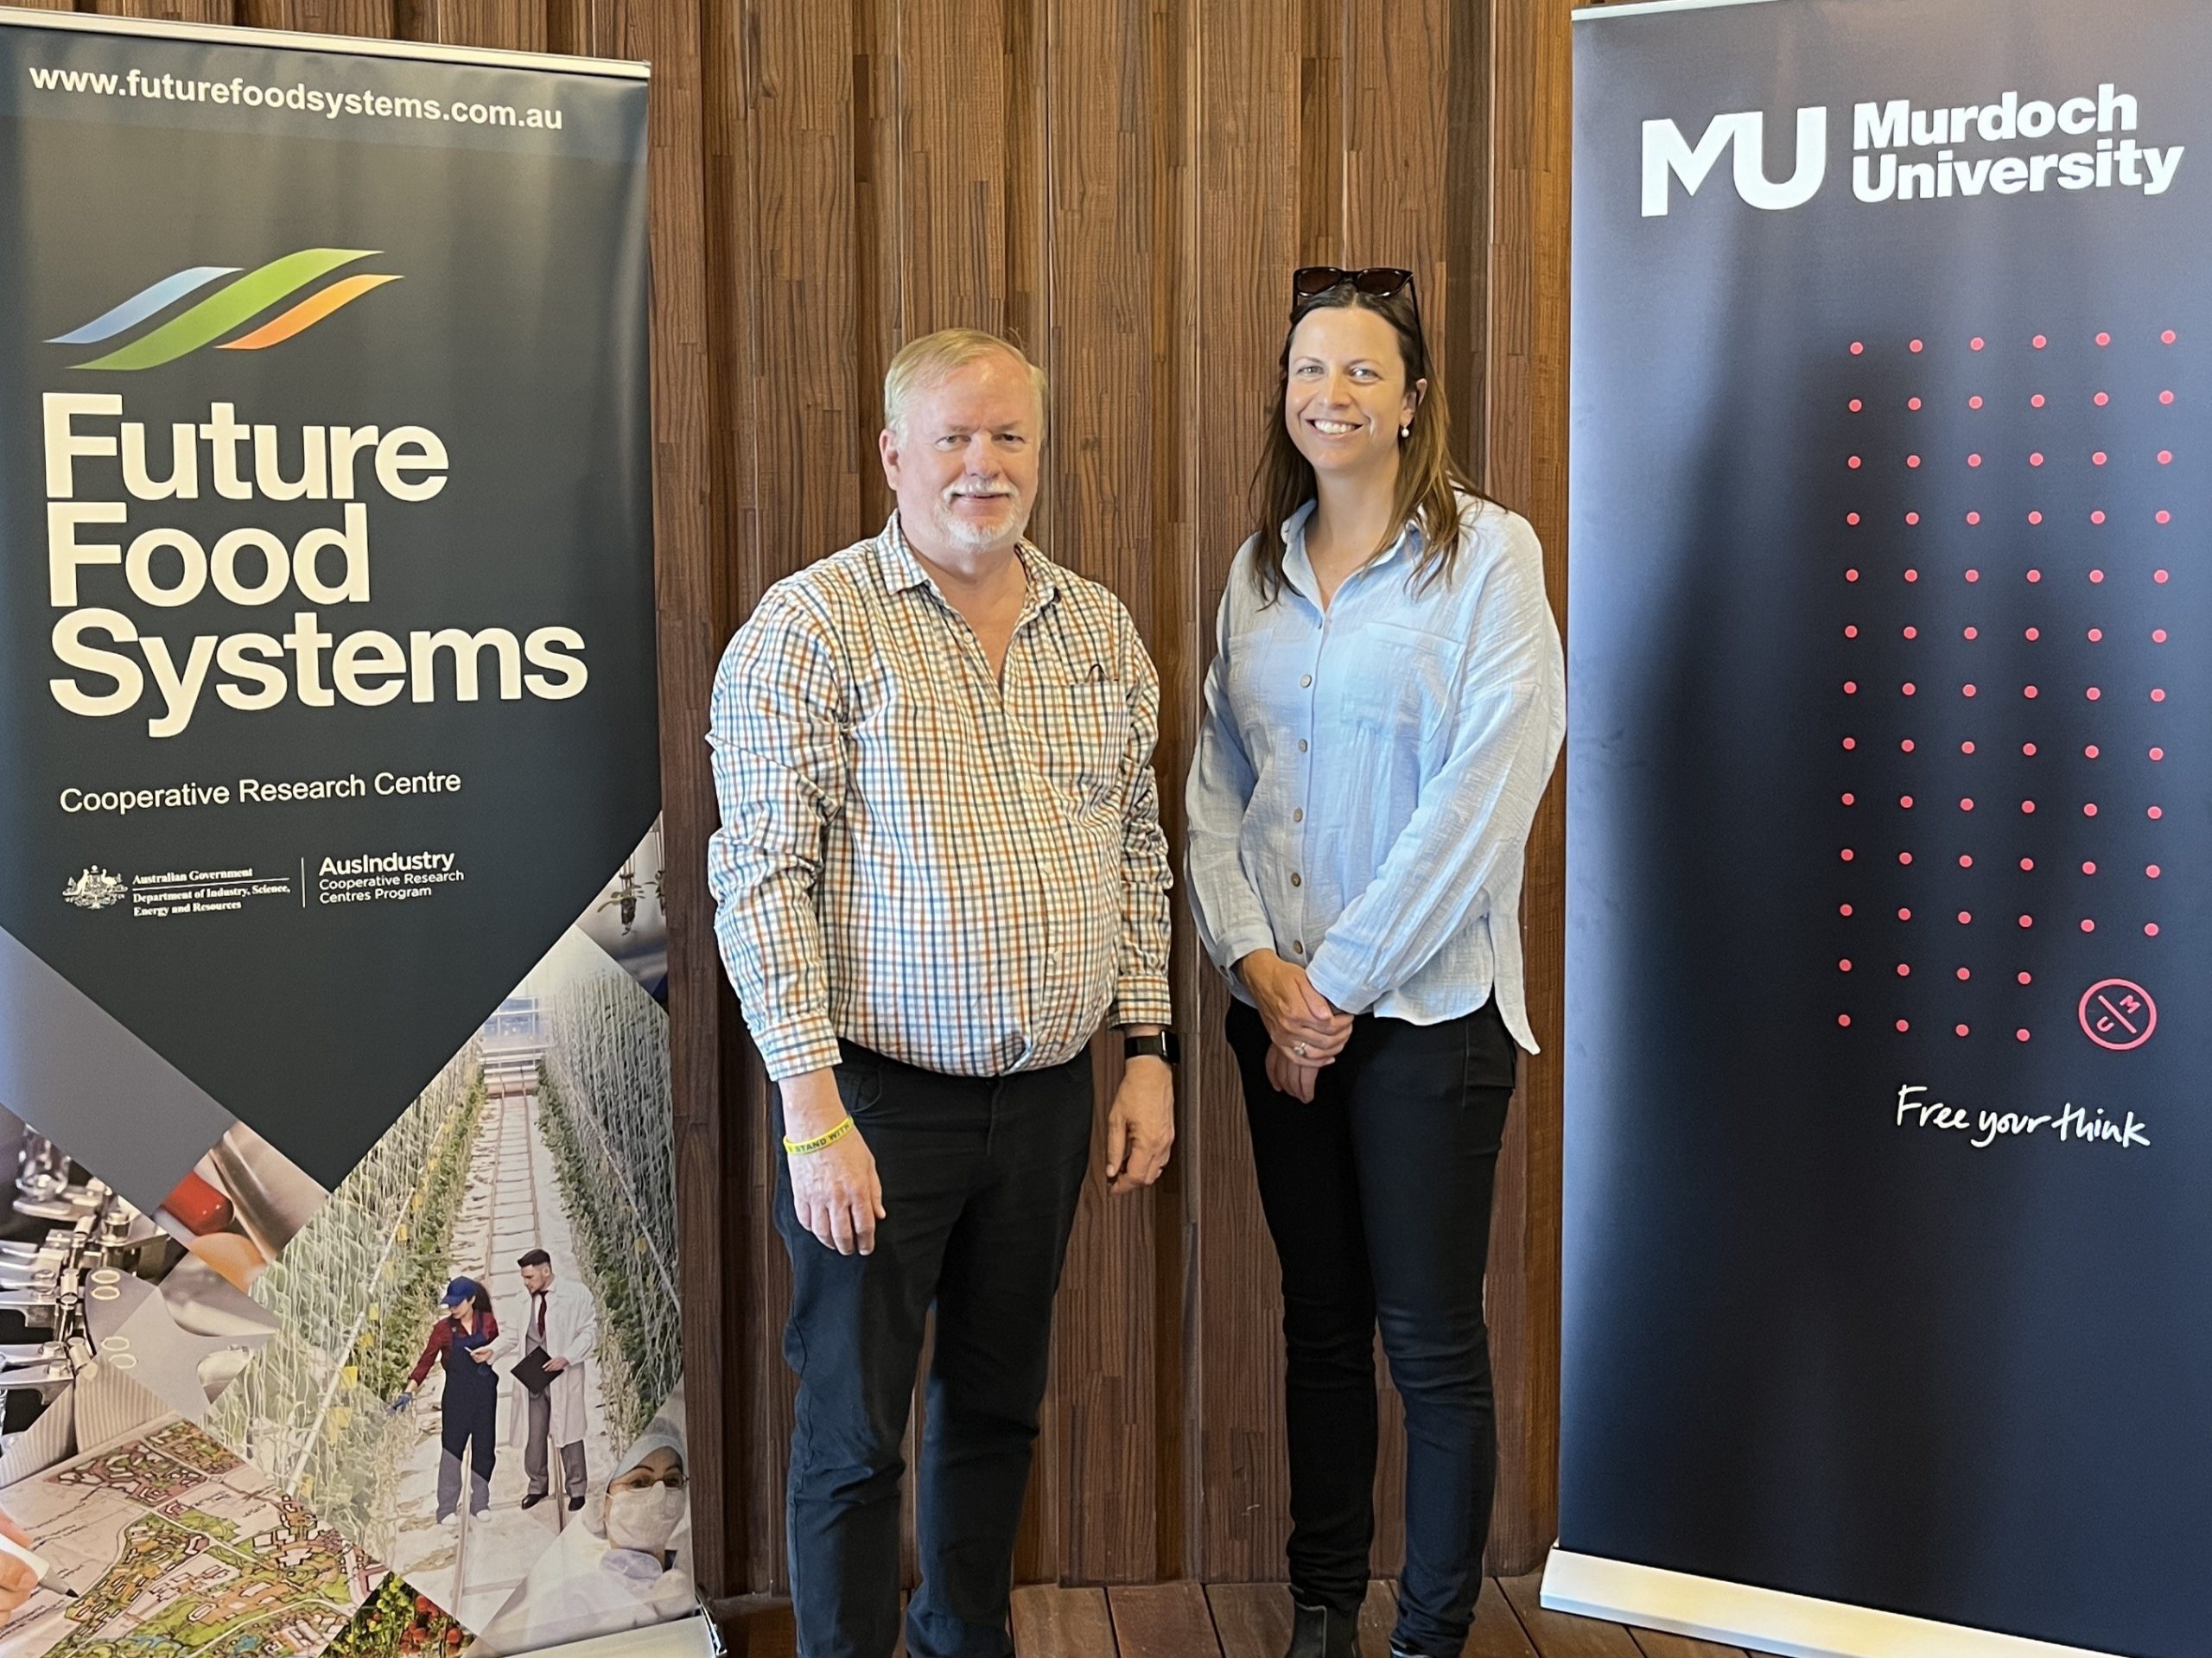 Murdoch University’s Food Futures Institute has appointed key leaders to drive operations at its Food Technology Facility. Future Food Systems CRC is a major partner in the operations of the FTF.